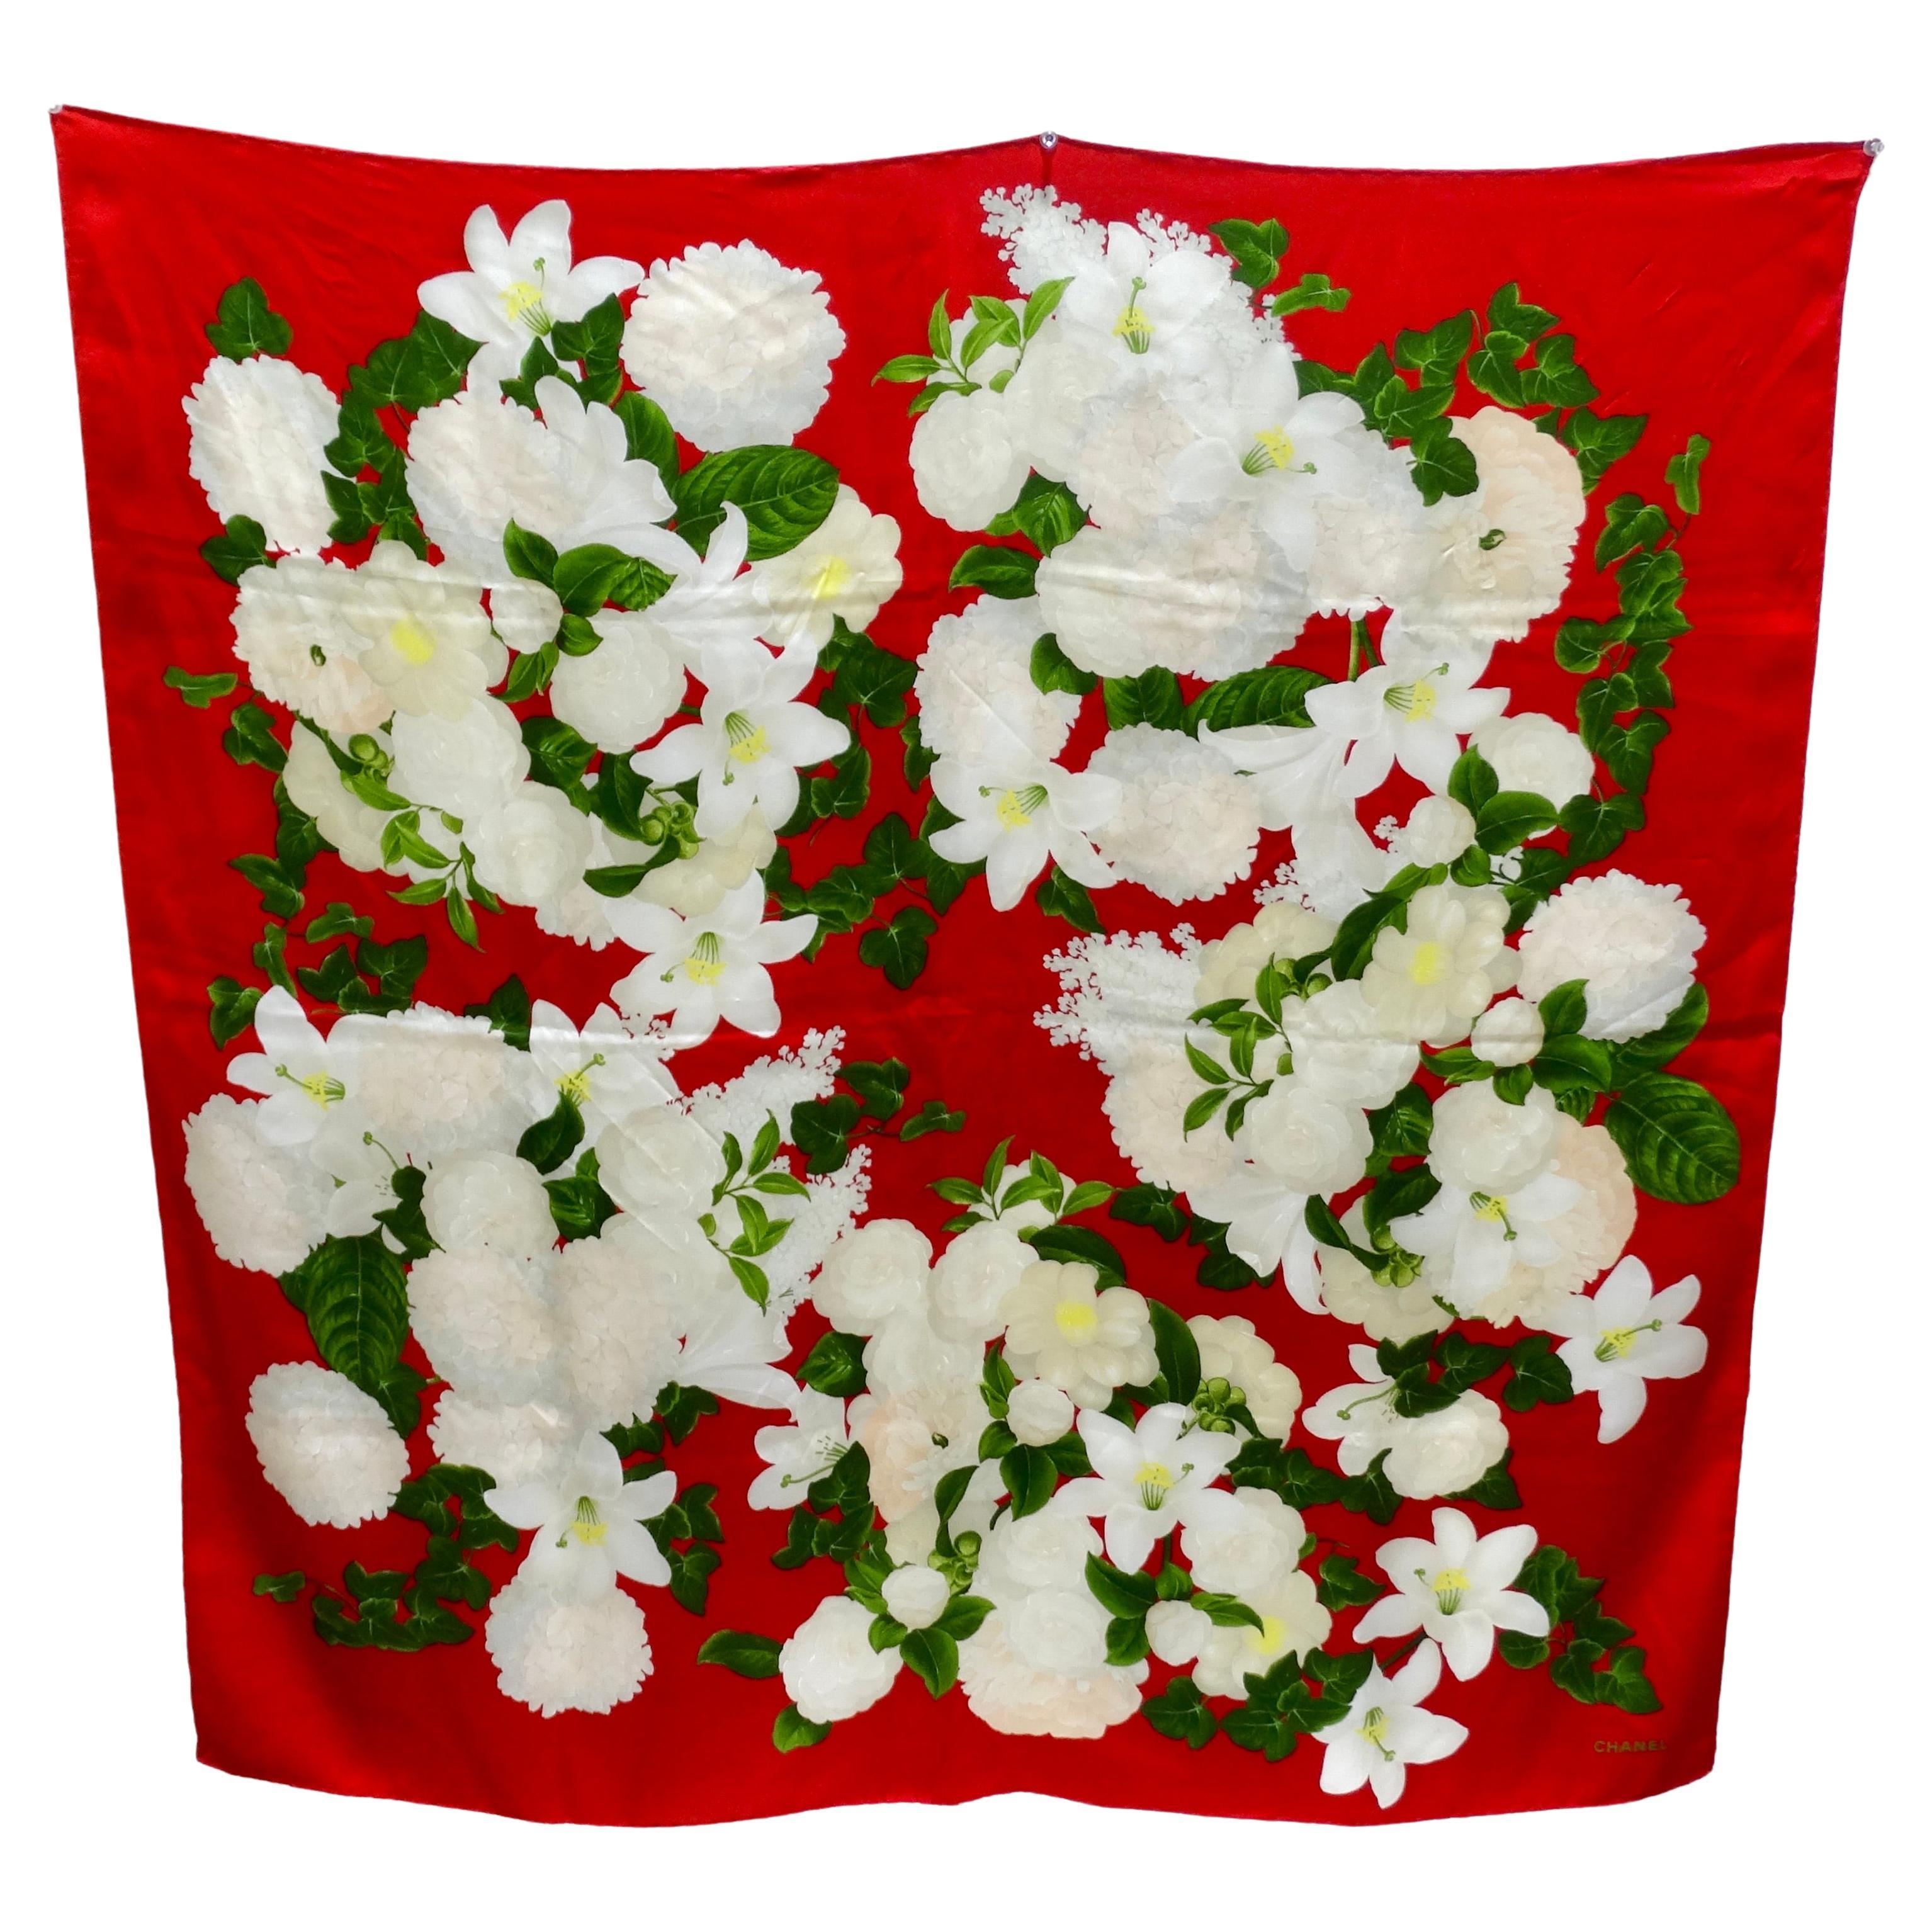 This silk Chanel scarf gives you a beautifully soft silk paired with a print of lillies and hydrangeas. The print keeps it elegant by only using white flowers but keeps it fresh and modern with a highly contrasting red. It features a small 